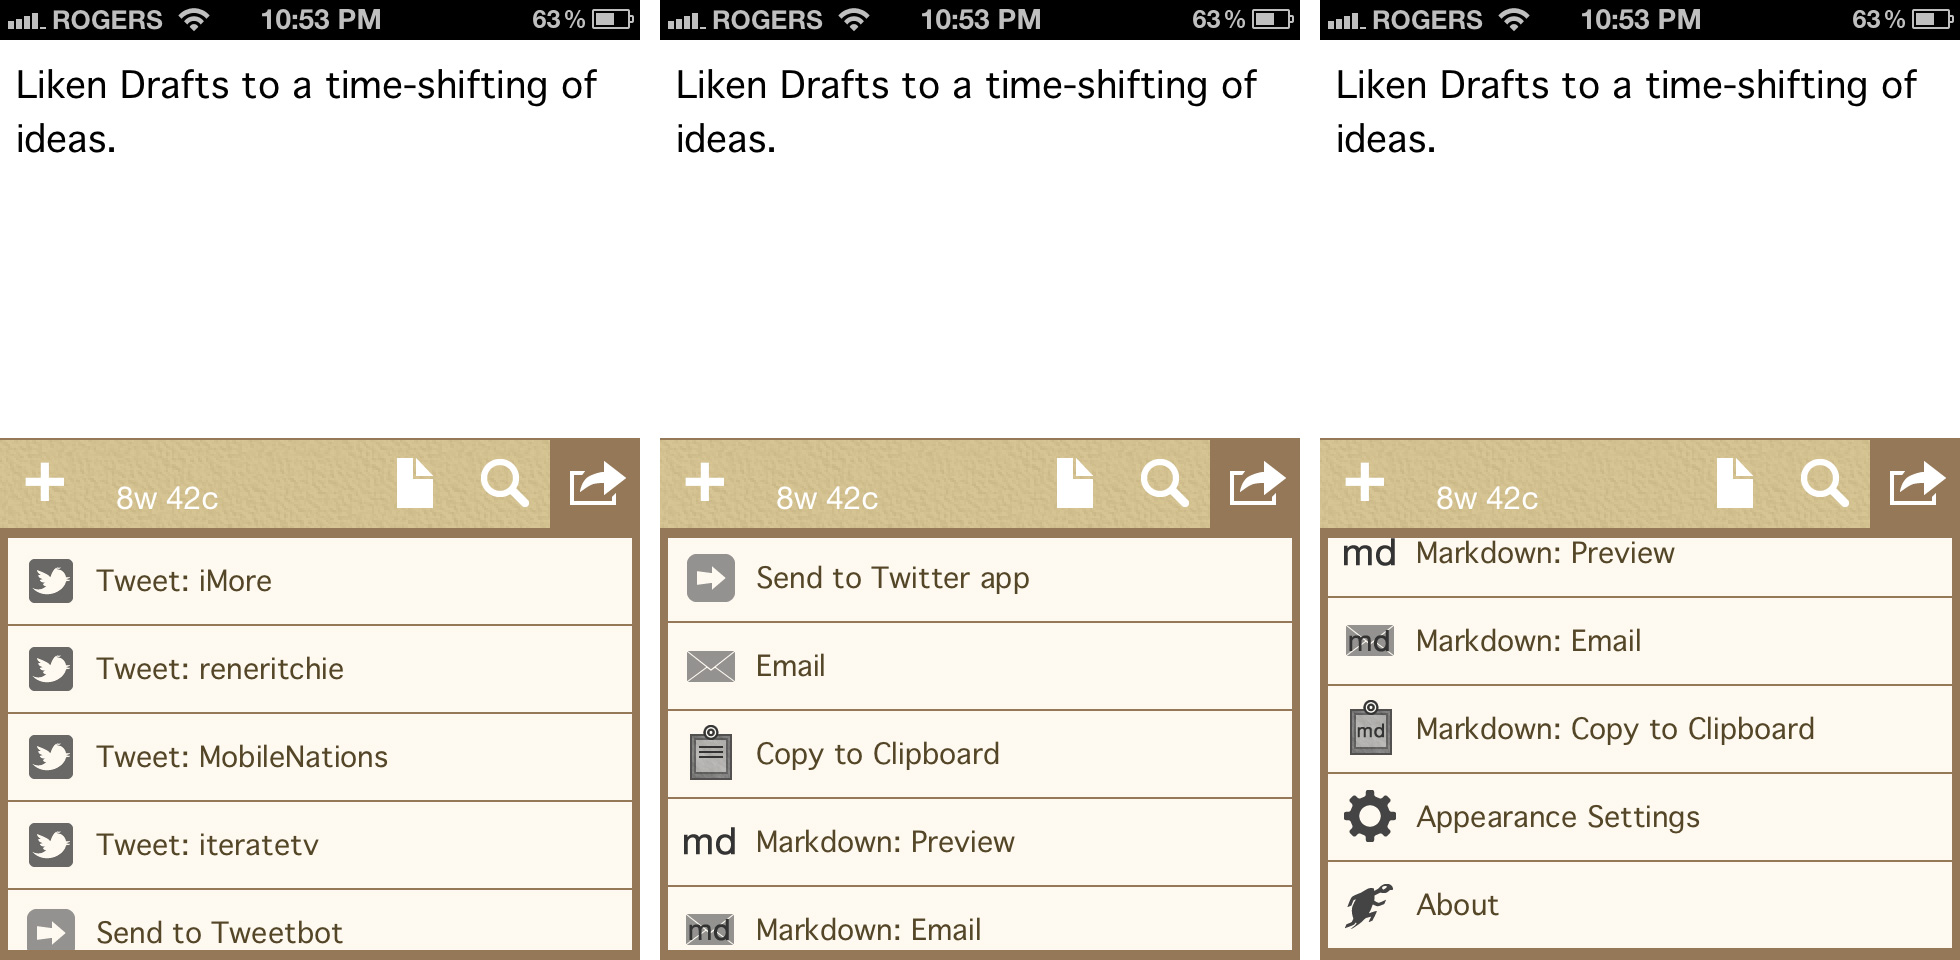 With the tap of an action button, drafts can work wonders like sharing to Twitter, emailing, and converting from Markdown to HTML